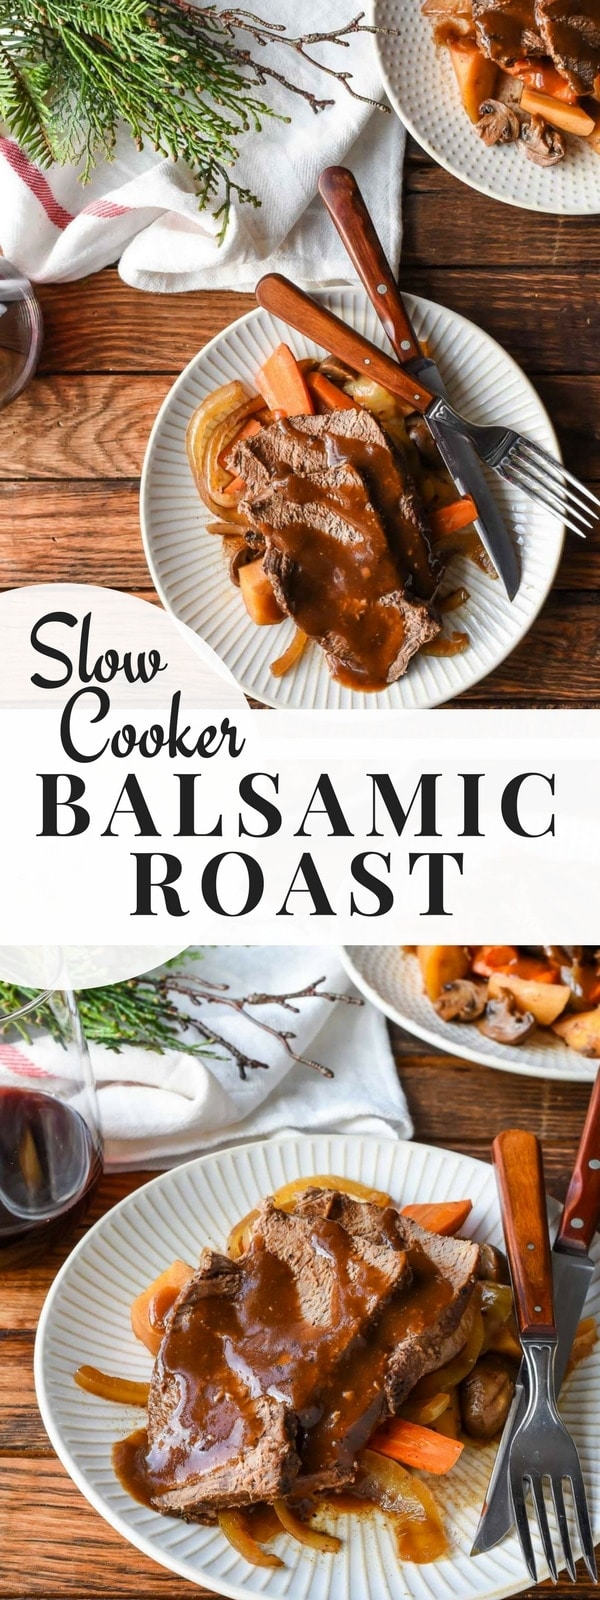 This Slow Cooker Balsamic Roast is an easy, delicious meal for any occasion.